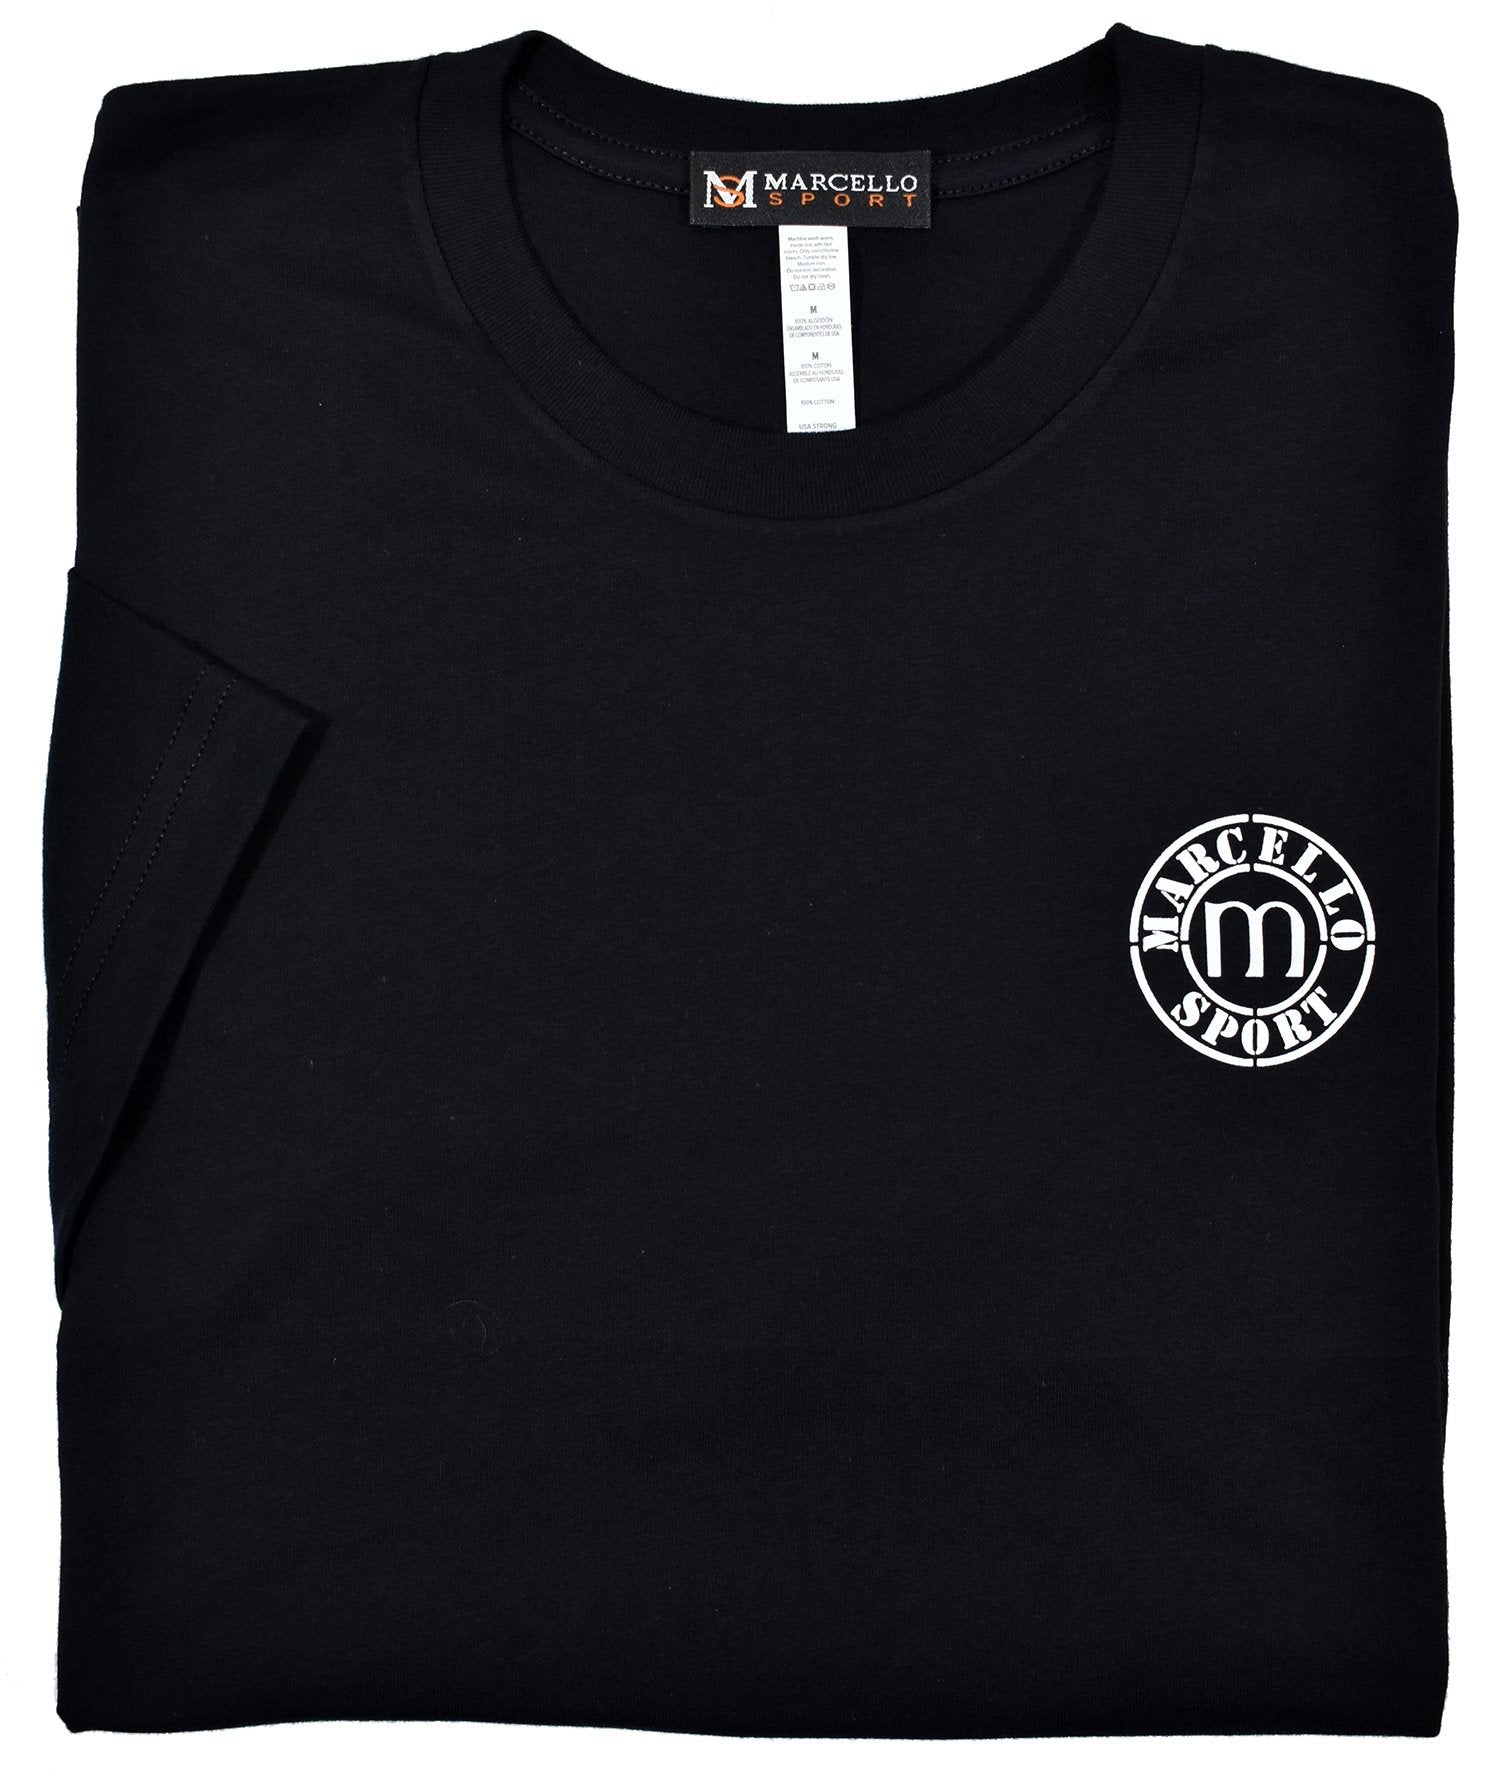 Marcello Sport Logo Tee  100% soft cotton, preshrunk. Ultra soft cotton feel. Contemporary fit, we suggest ordering one size up if between sizes or prefer a looser fit. Machine wash and dry.